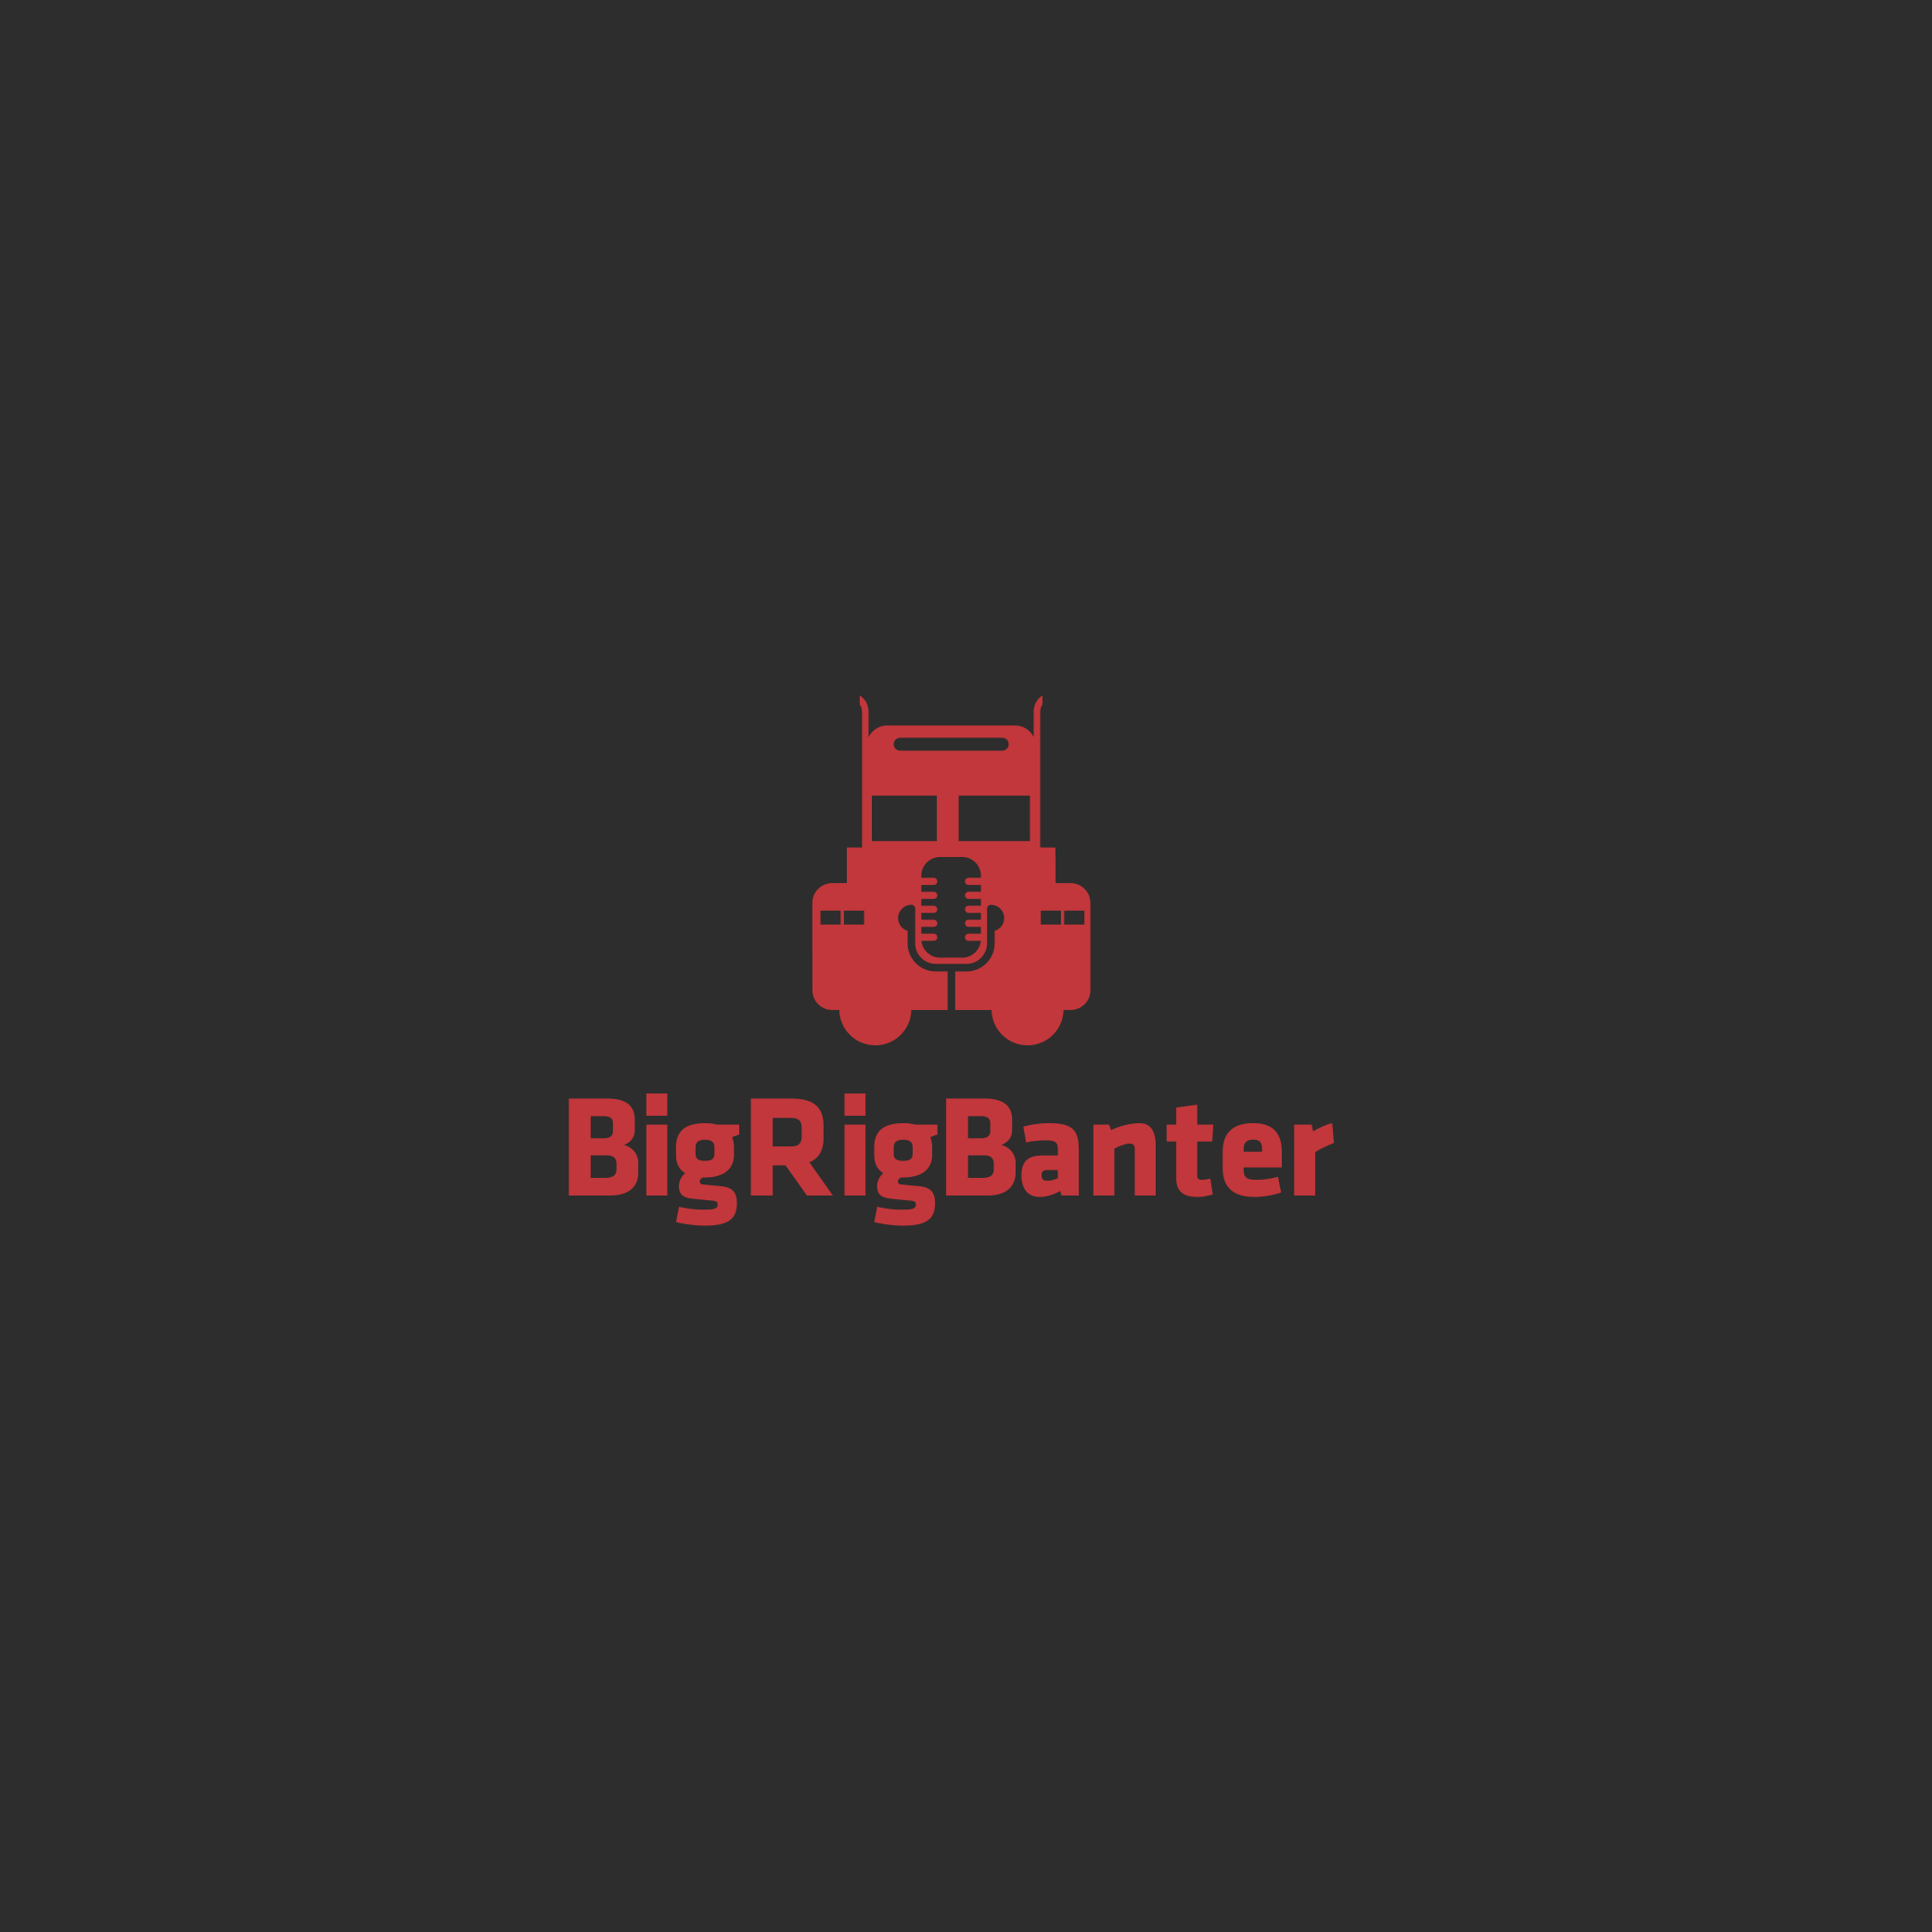 BigRigBanter a trucking podcast focused on all things commercial driving and transportation related.